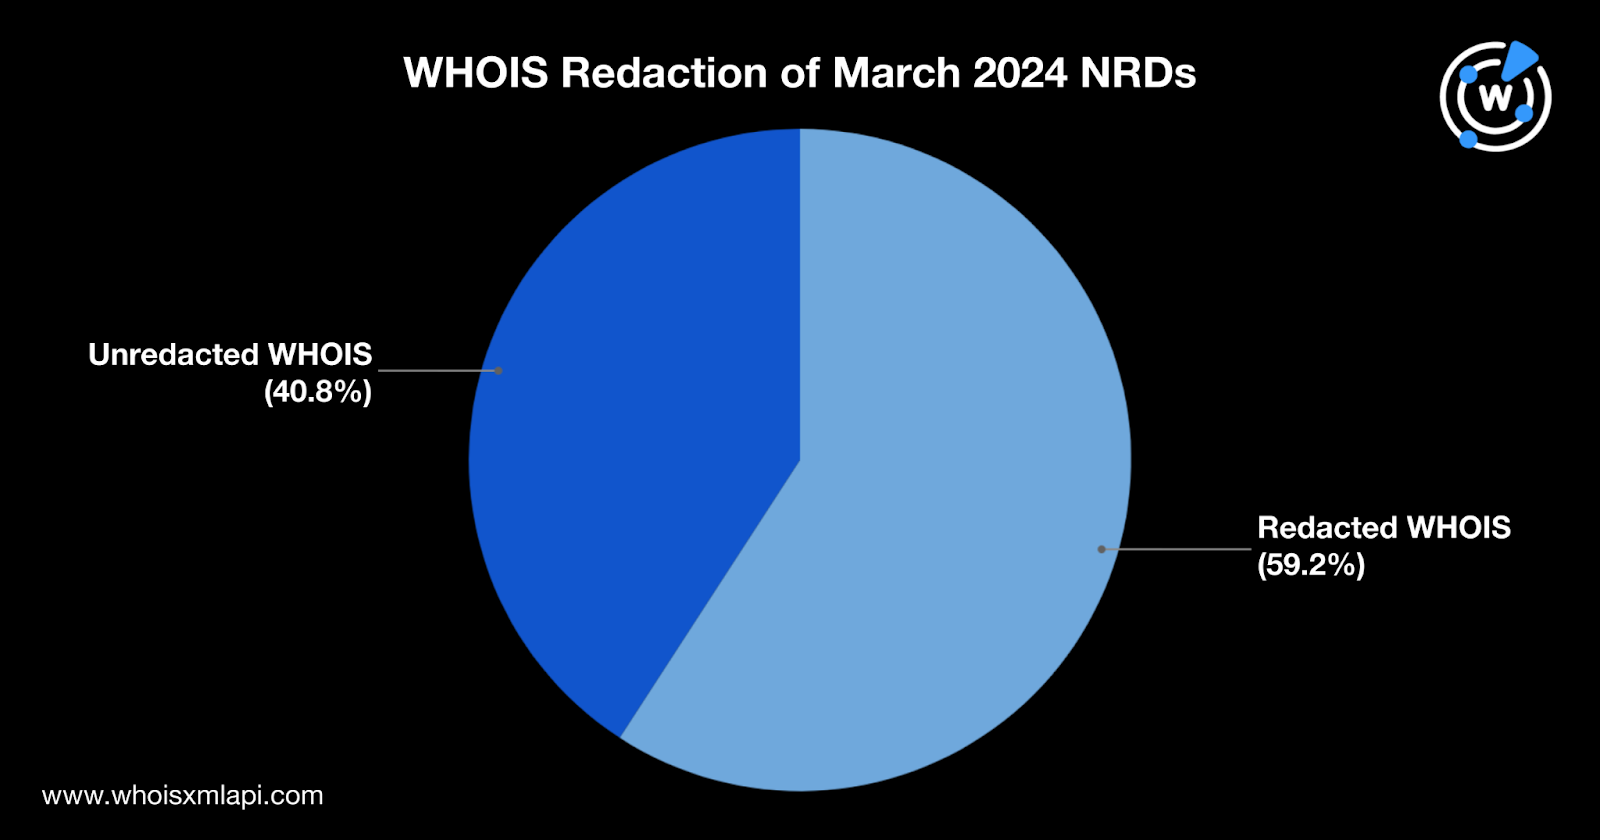 WHOIS redaction of March 2024 NRDs